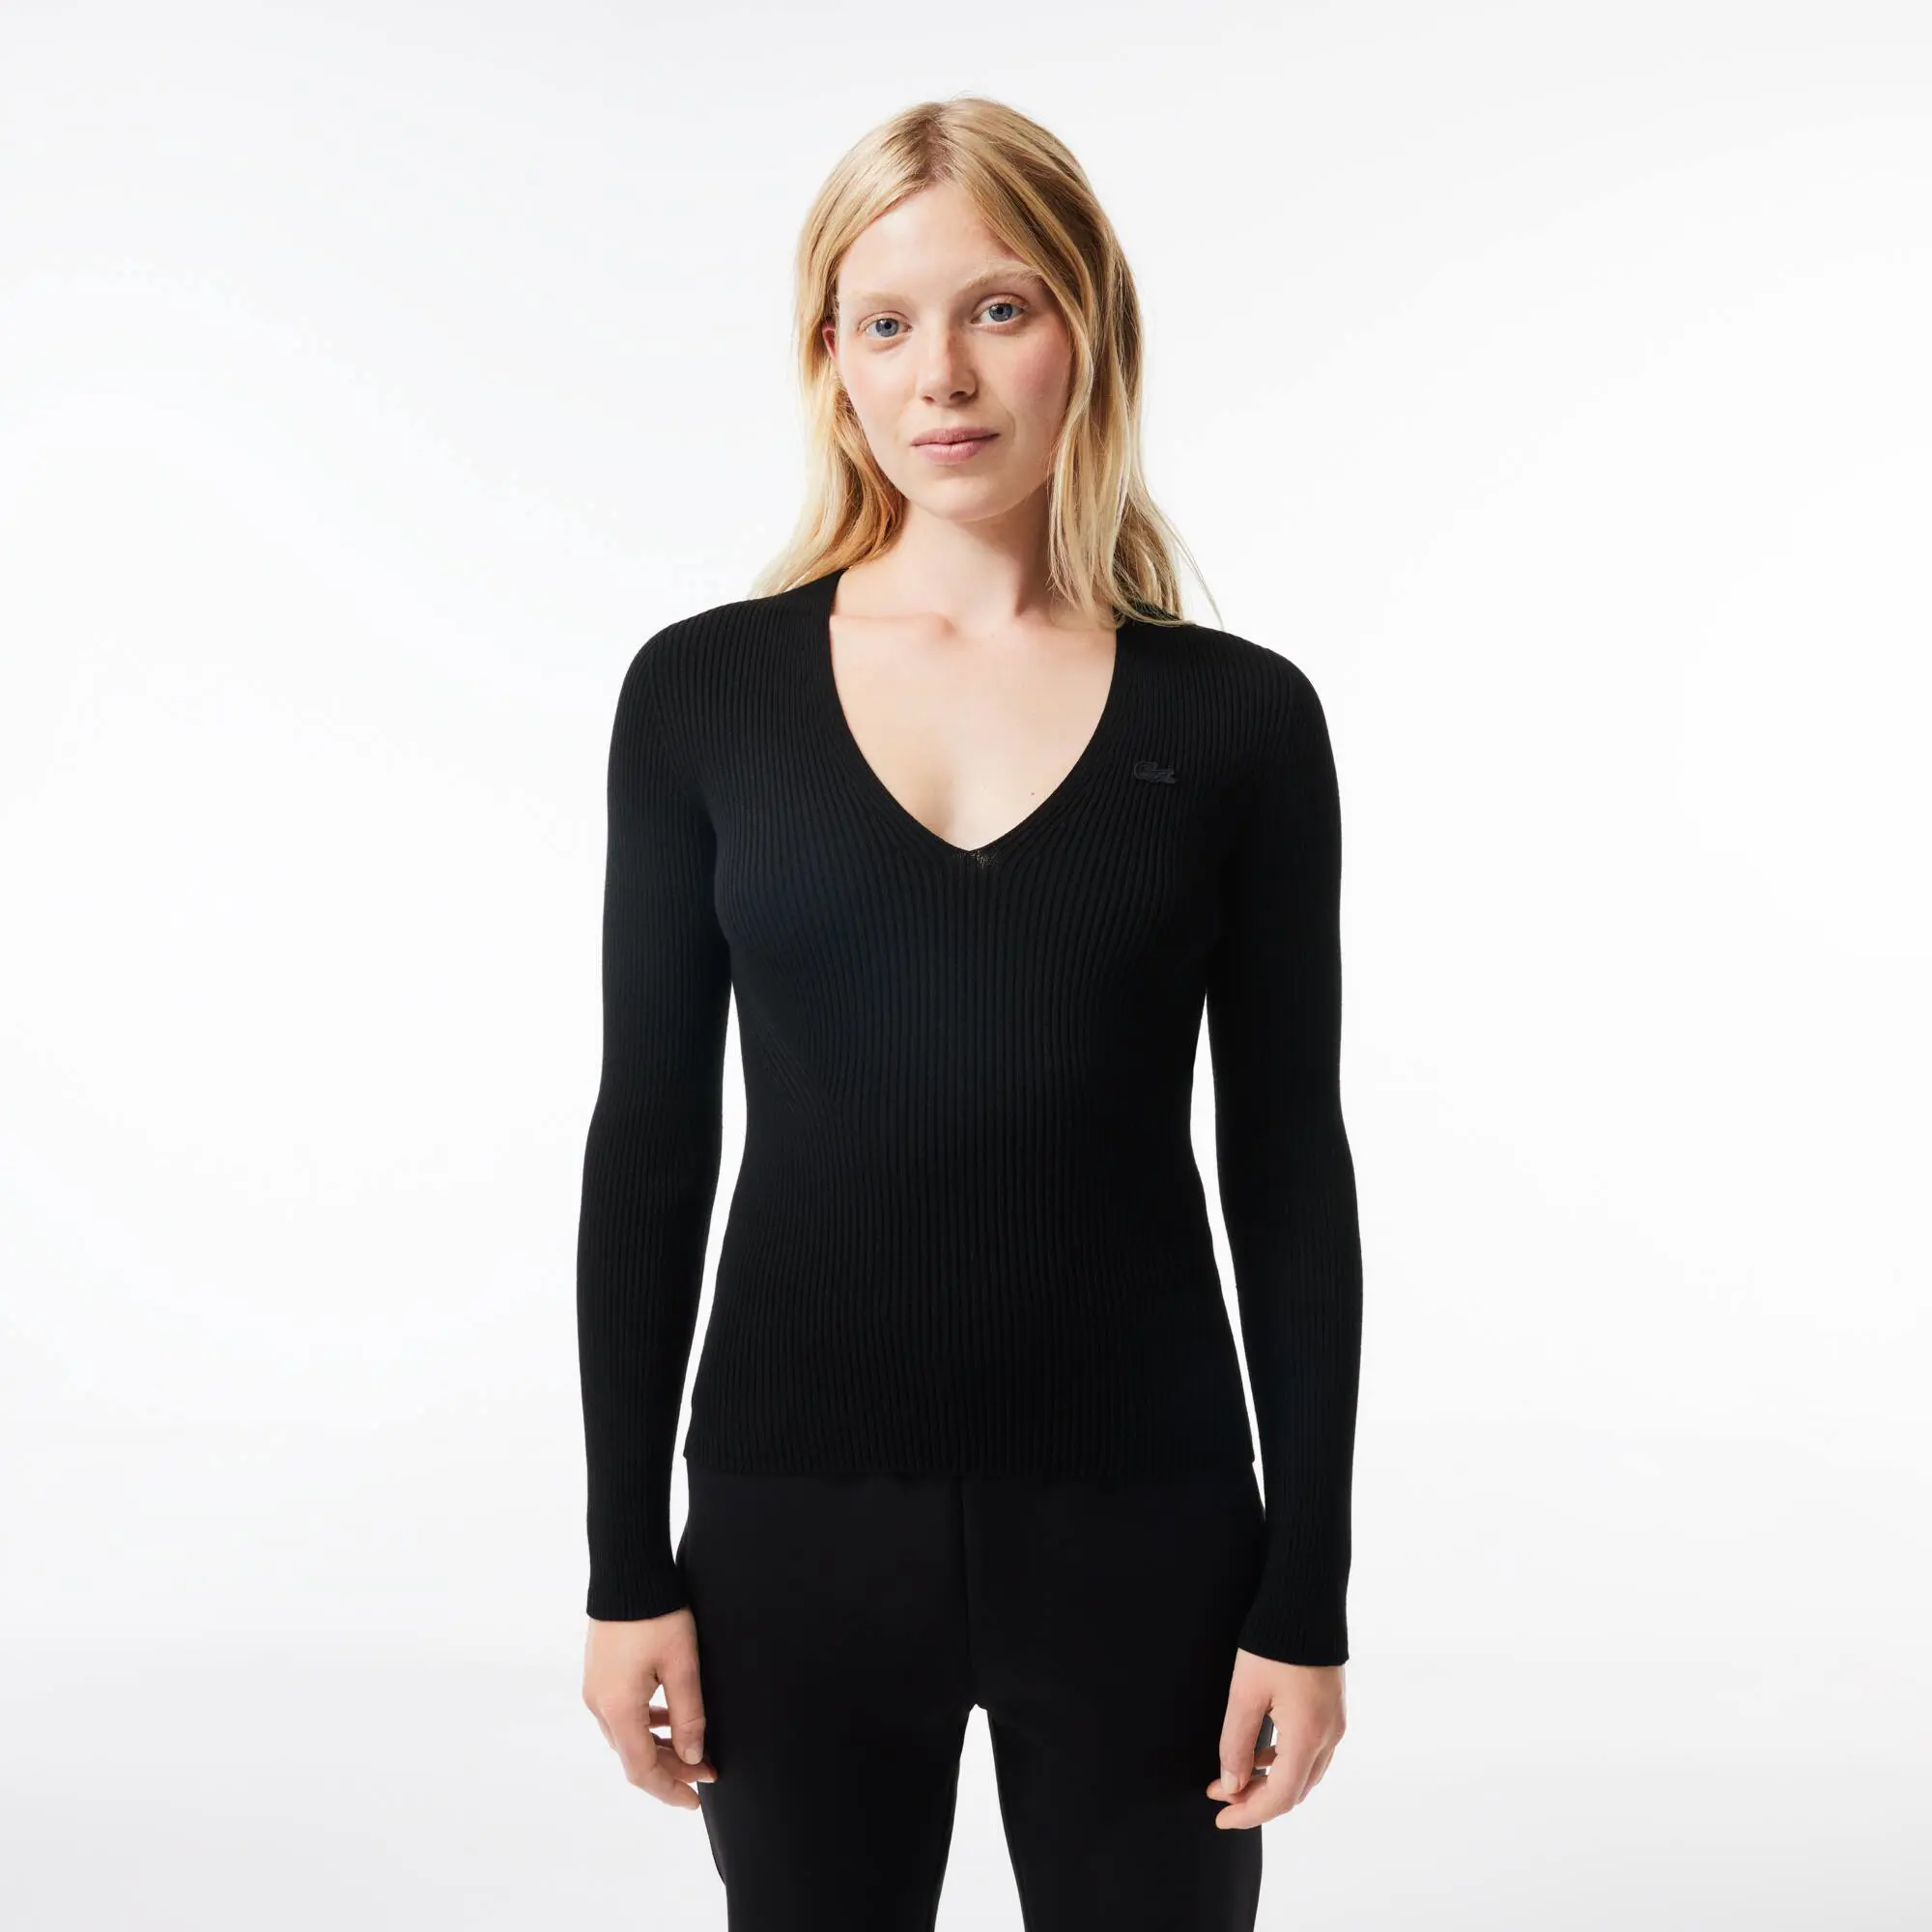 Lacoste Women's Seamless Ribbed V-Neck Sweater. 1